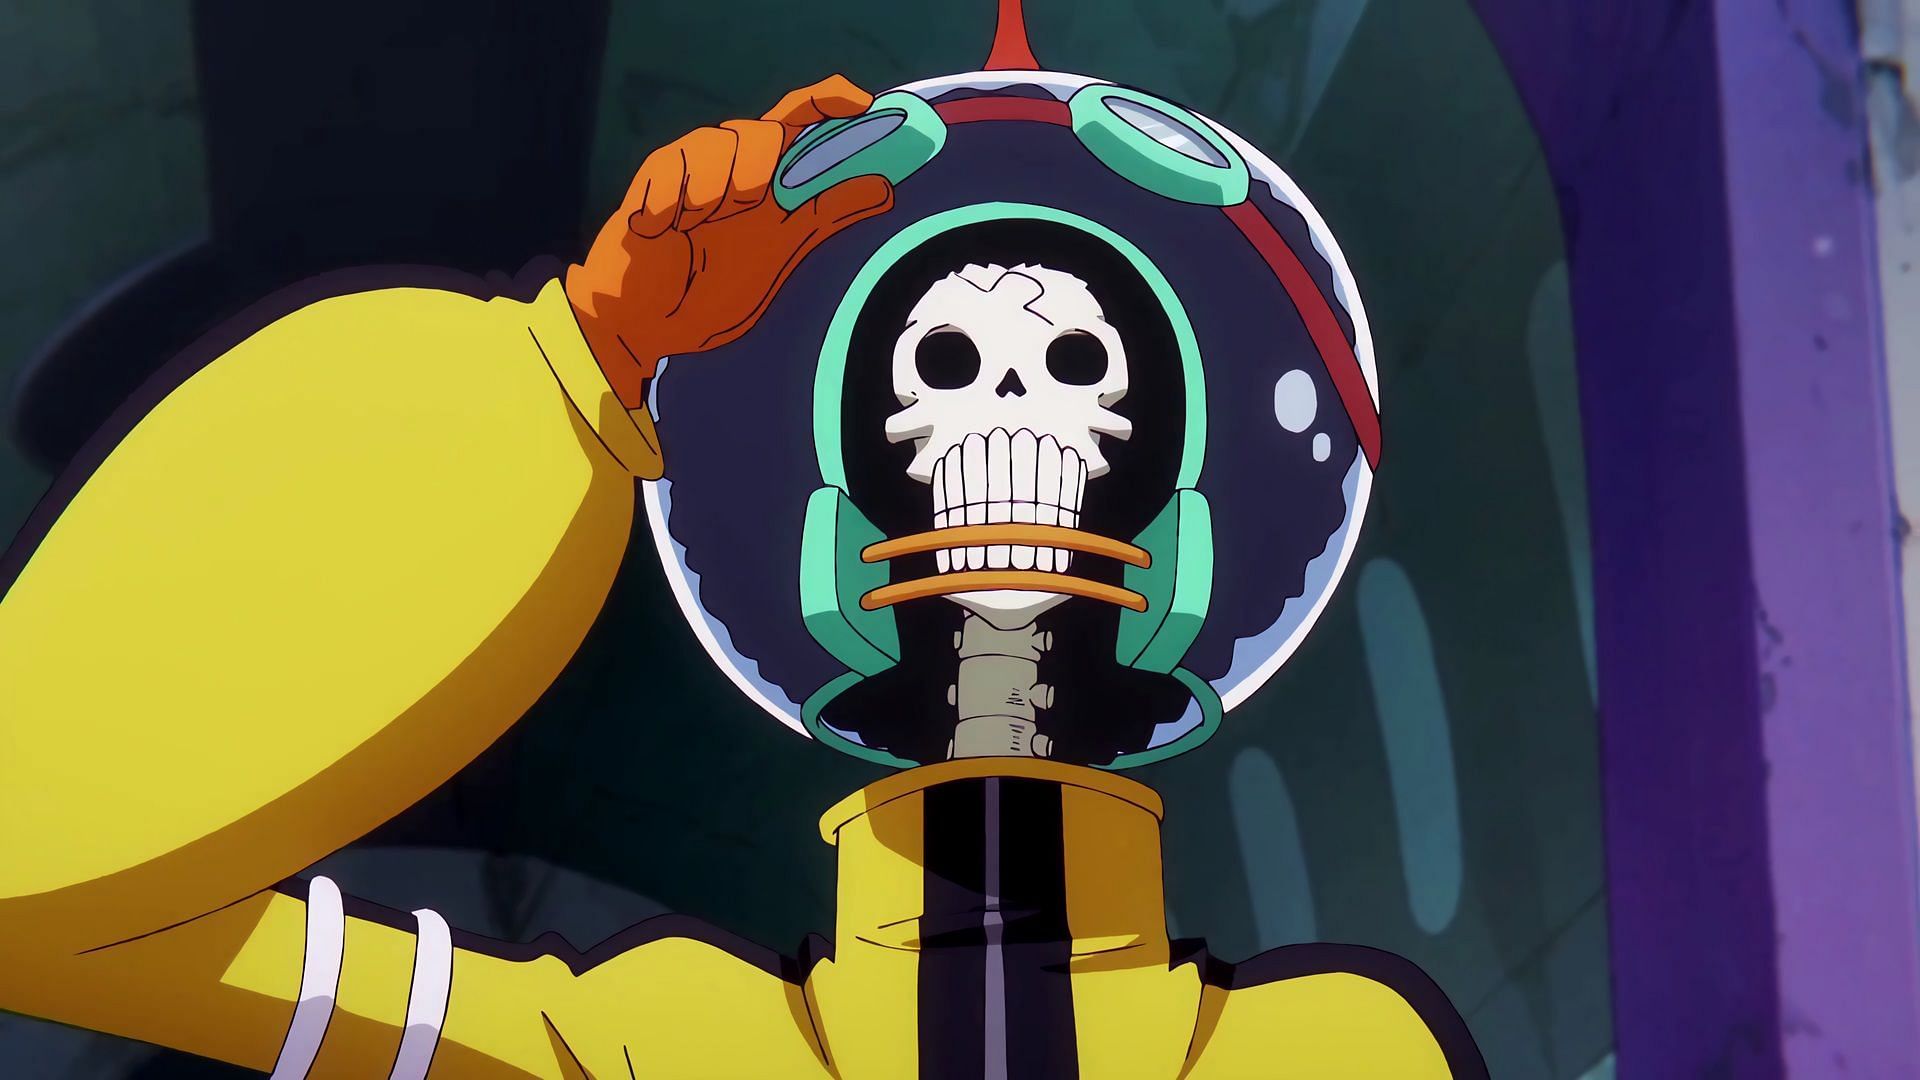 Brook as seen in the One Piece anime (Image via Toei Animation)